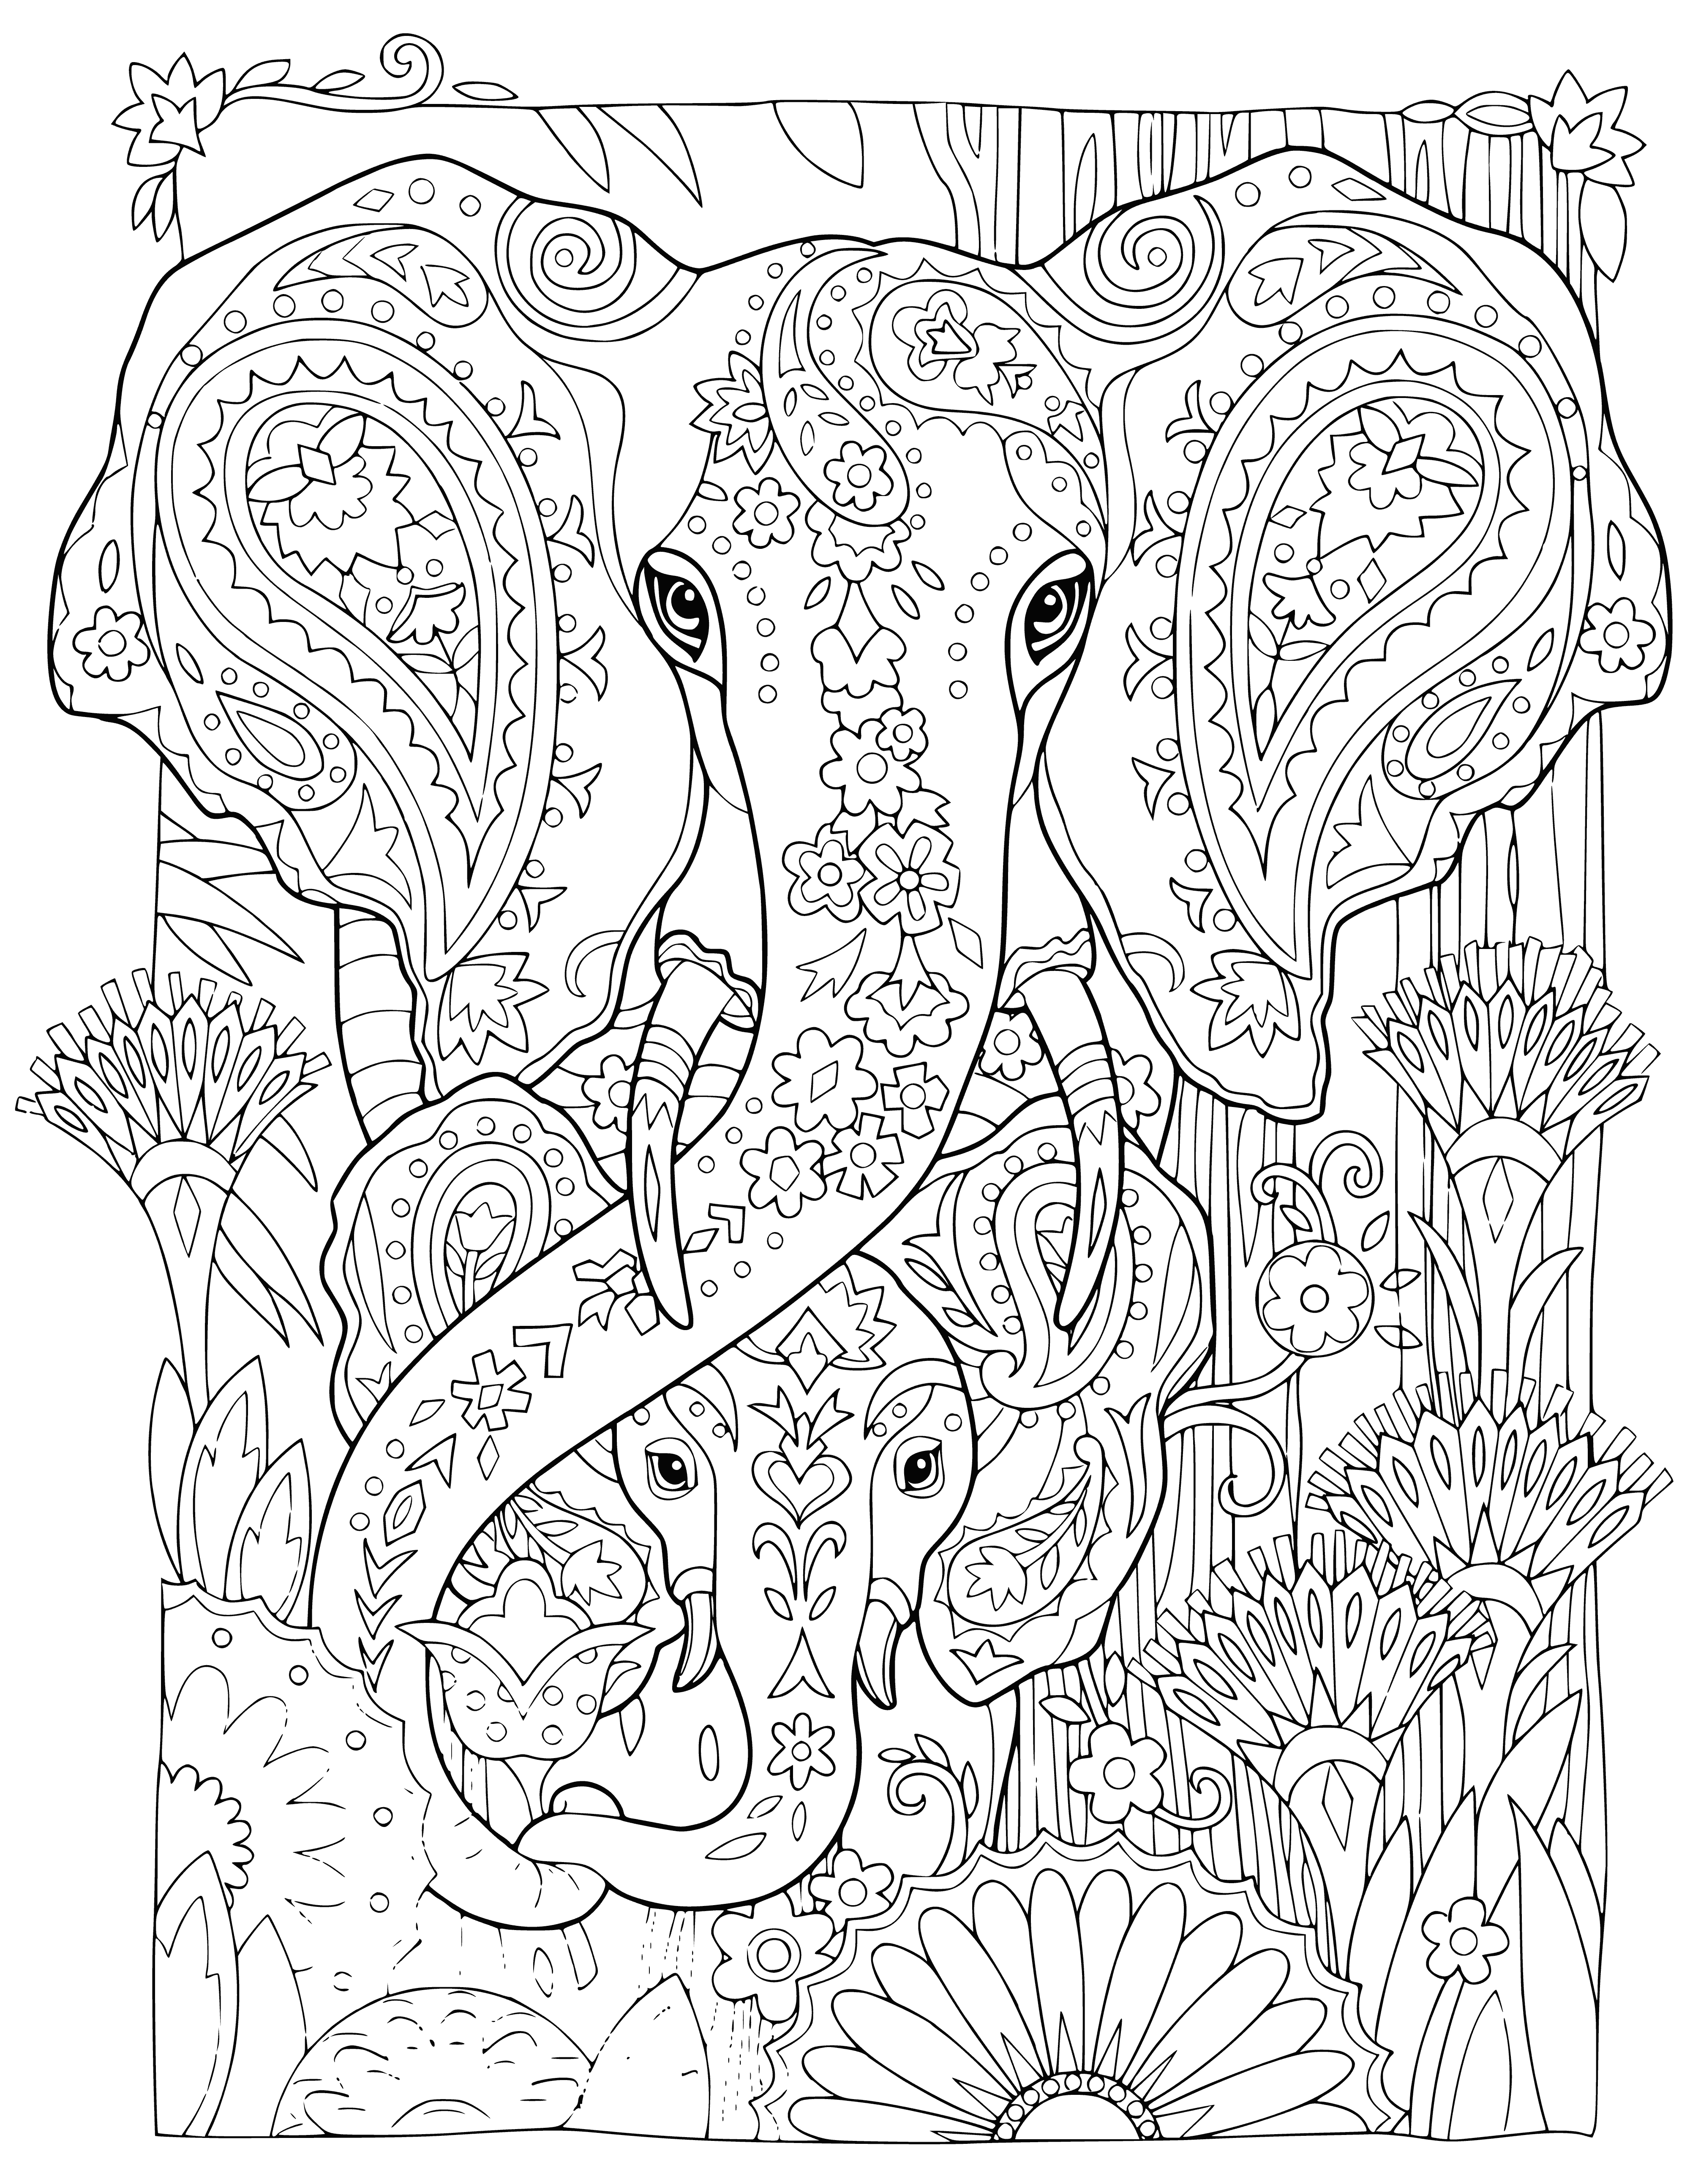 Elephant and baby elephant coloring page